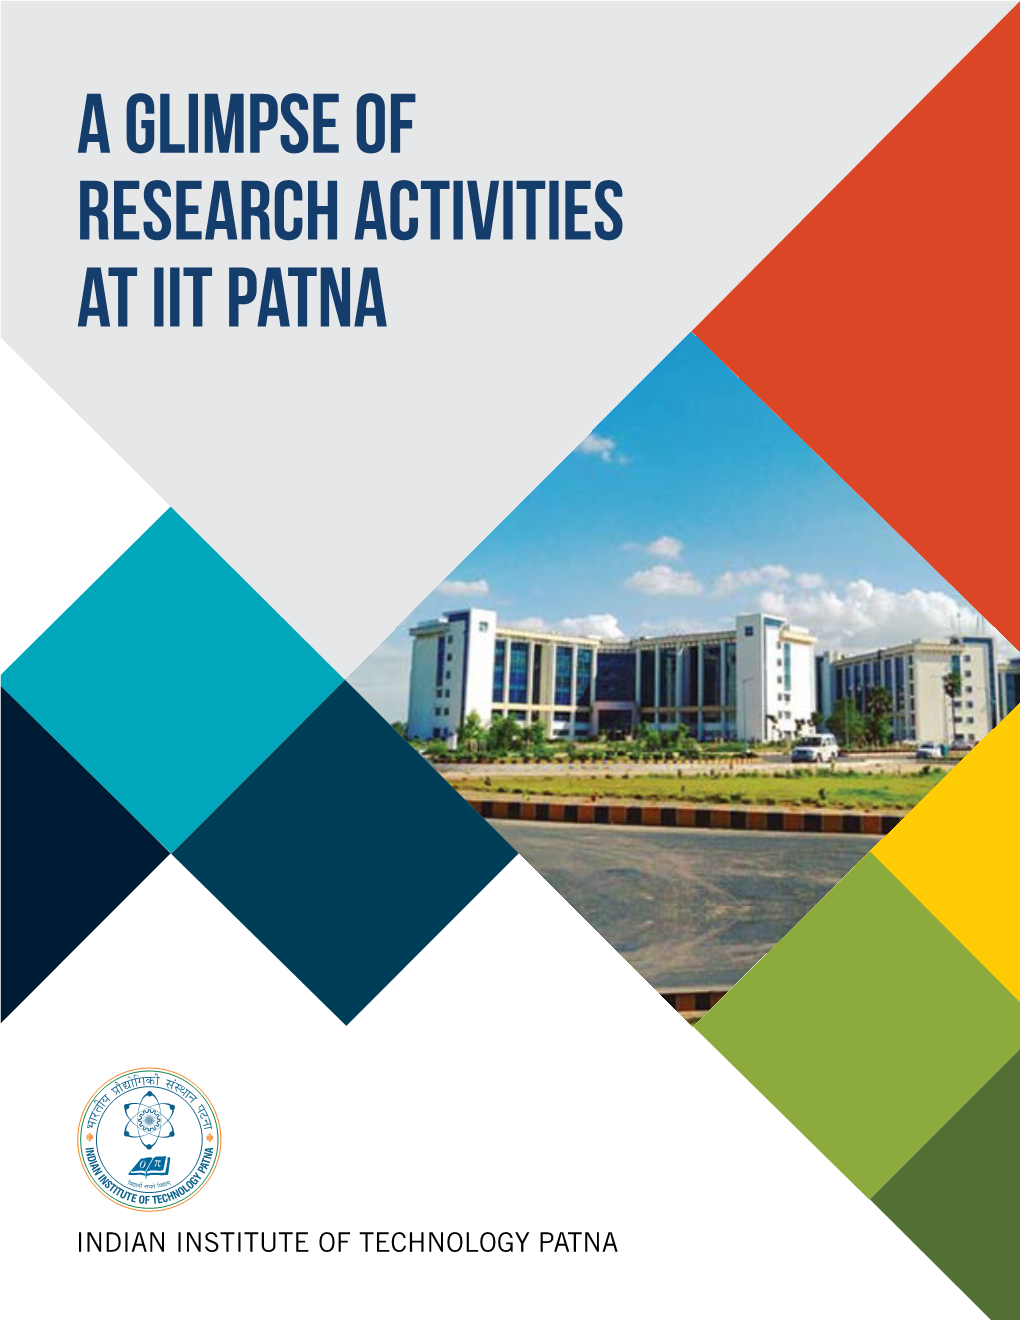 A Glimpse of Research Activities at IIT Patna (R&D Brochure 2017)